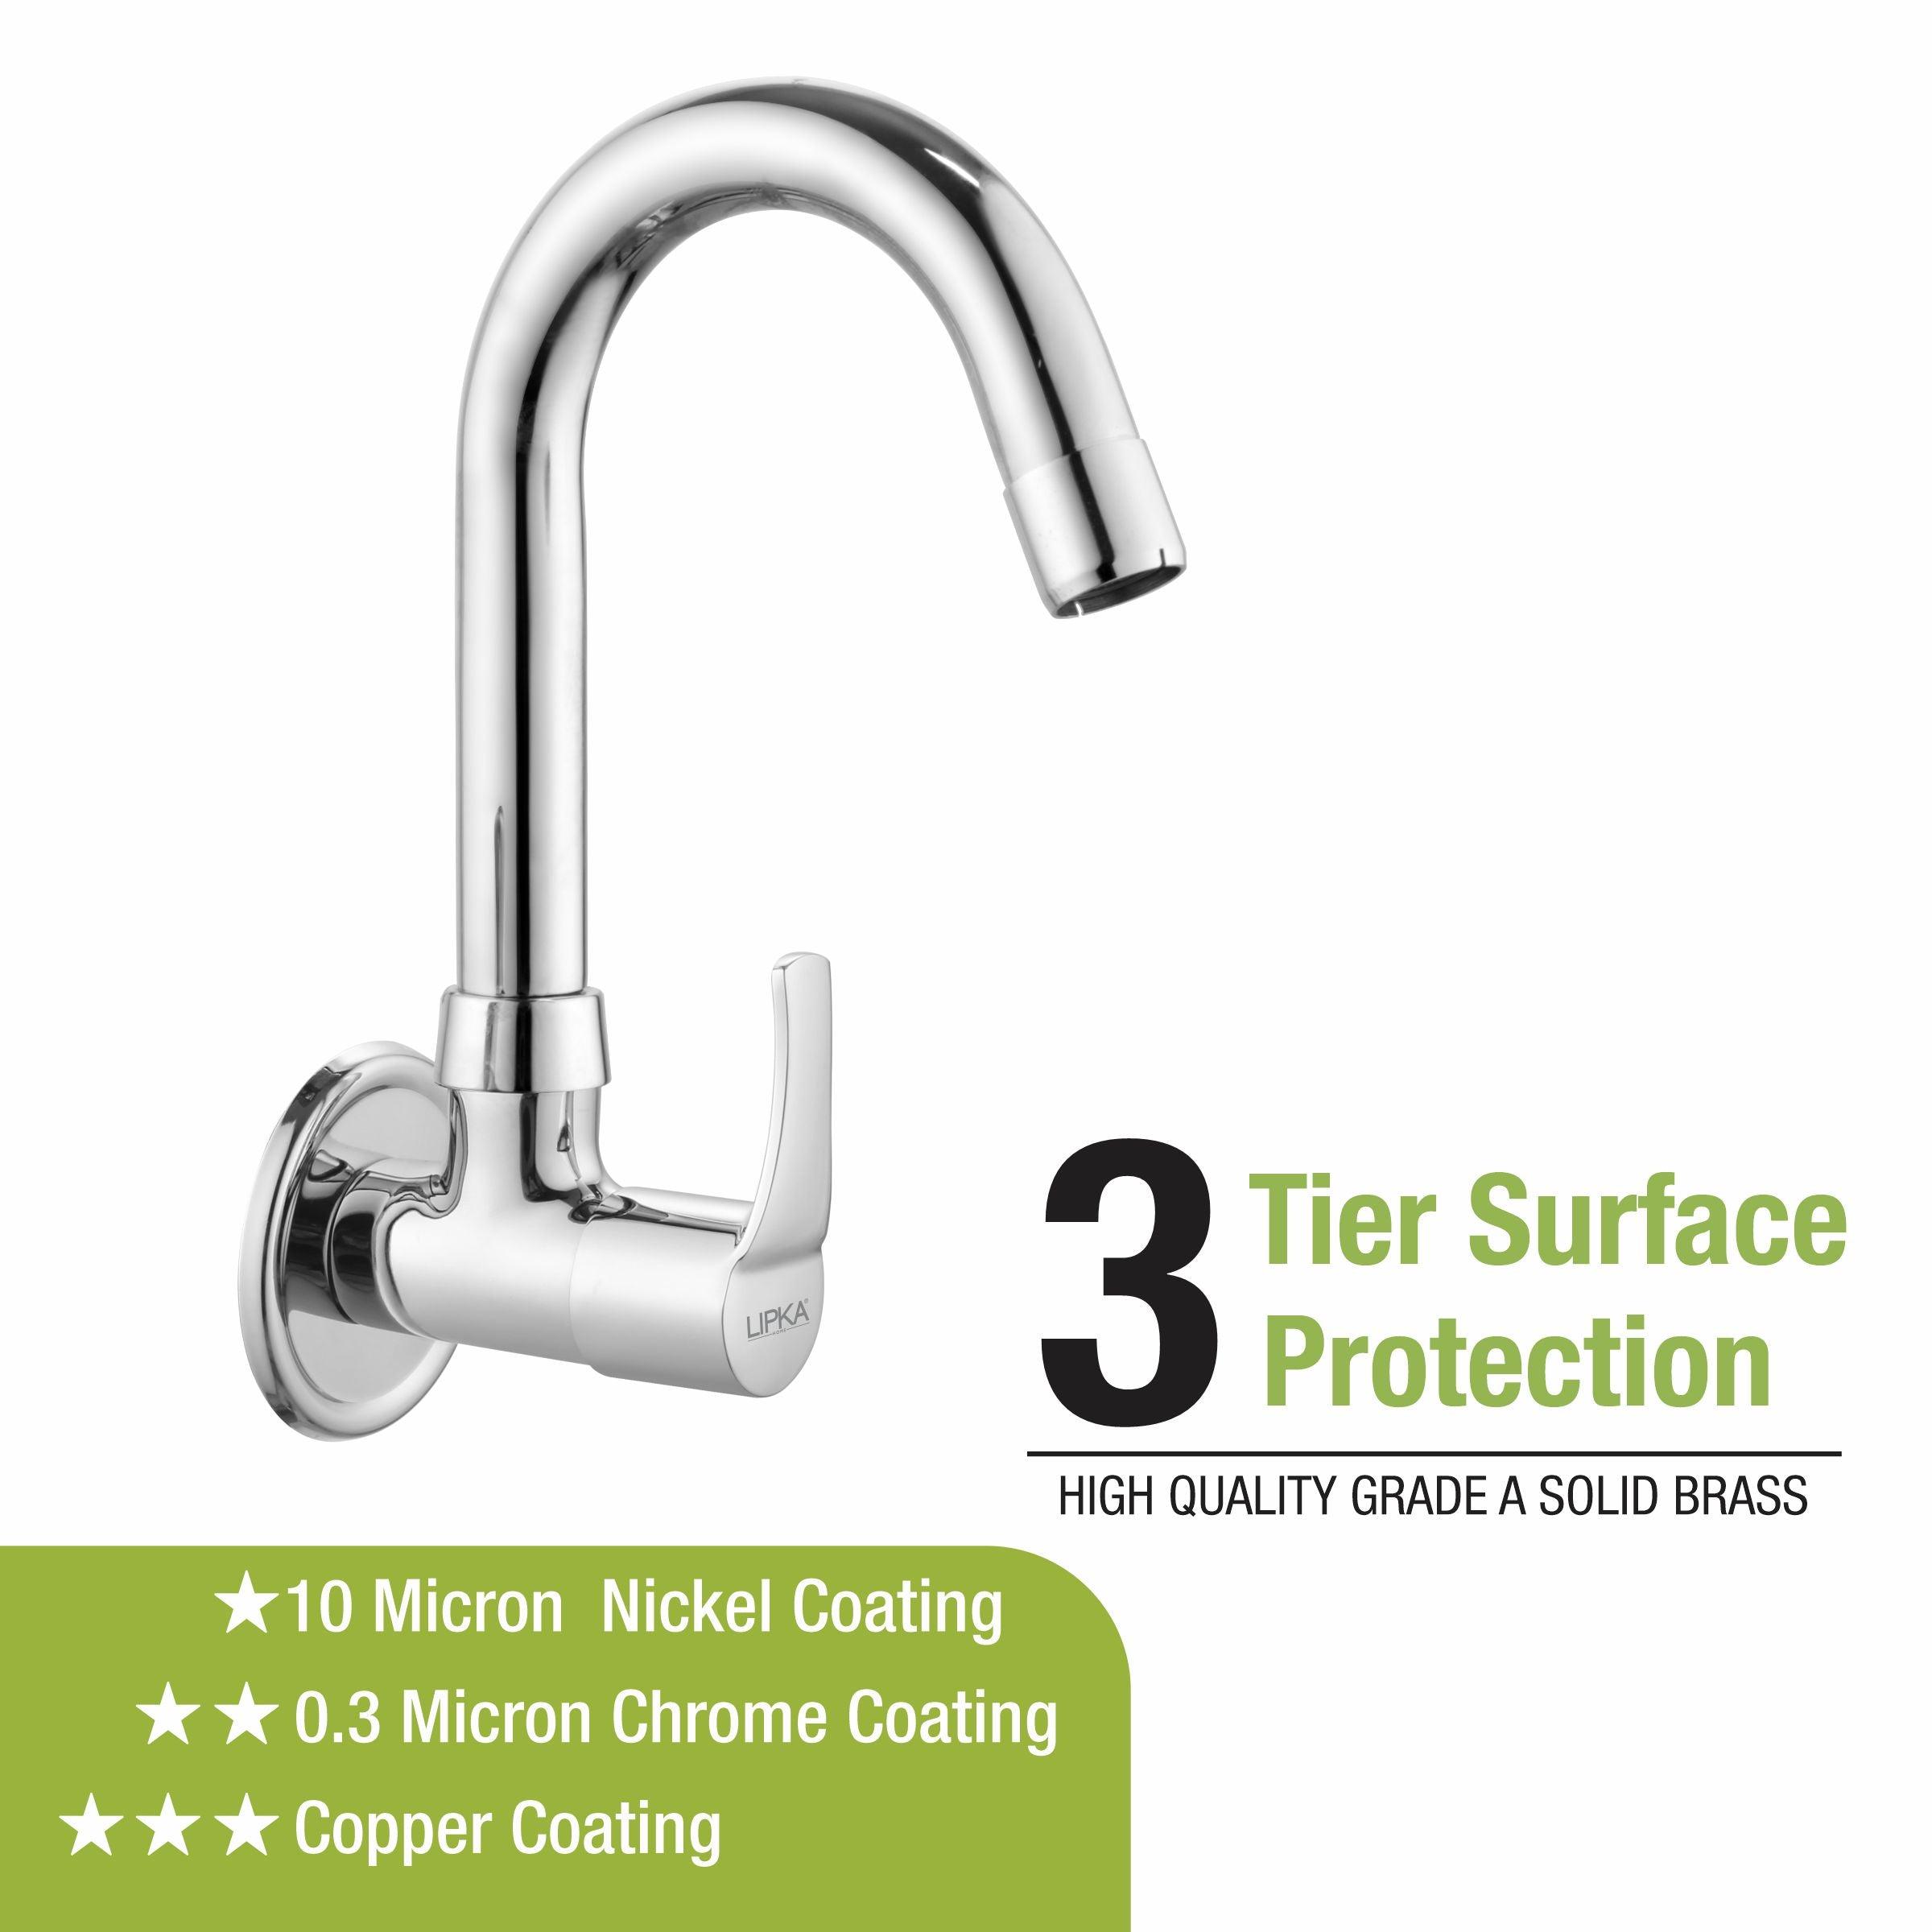 Coral Sink Tap Brass Faucet with Round Swivel Spout (12 Inches) - LIPKA - Lipka Home